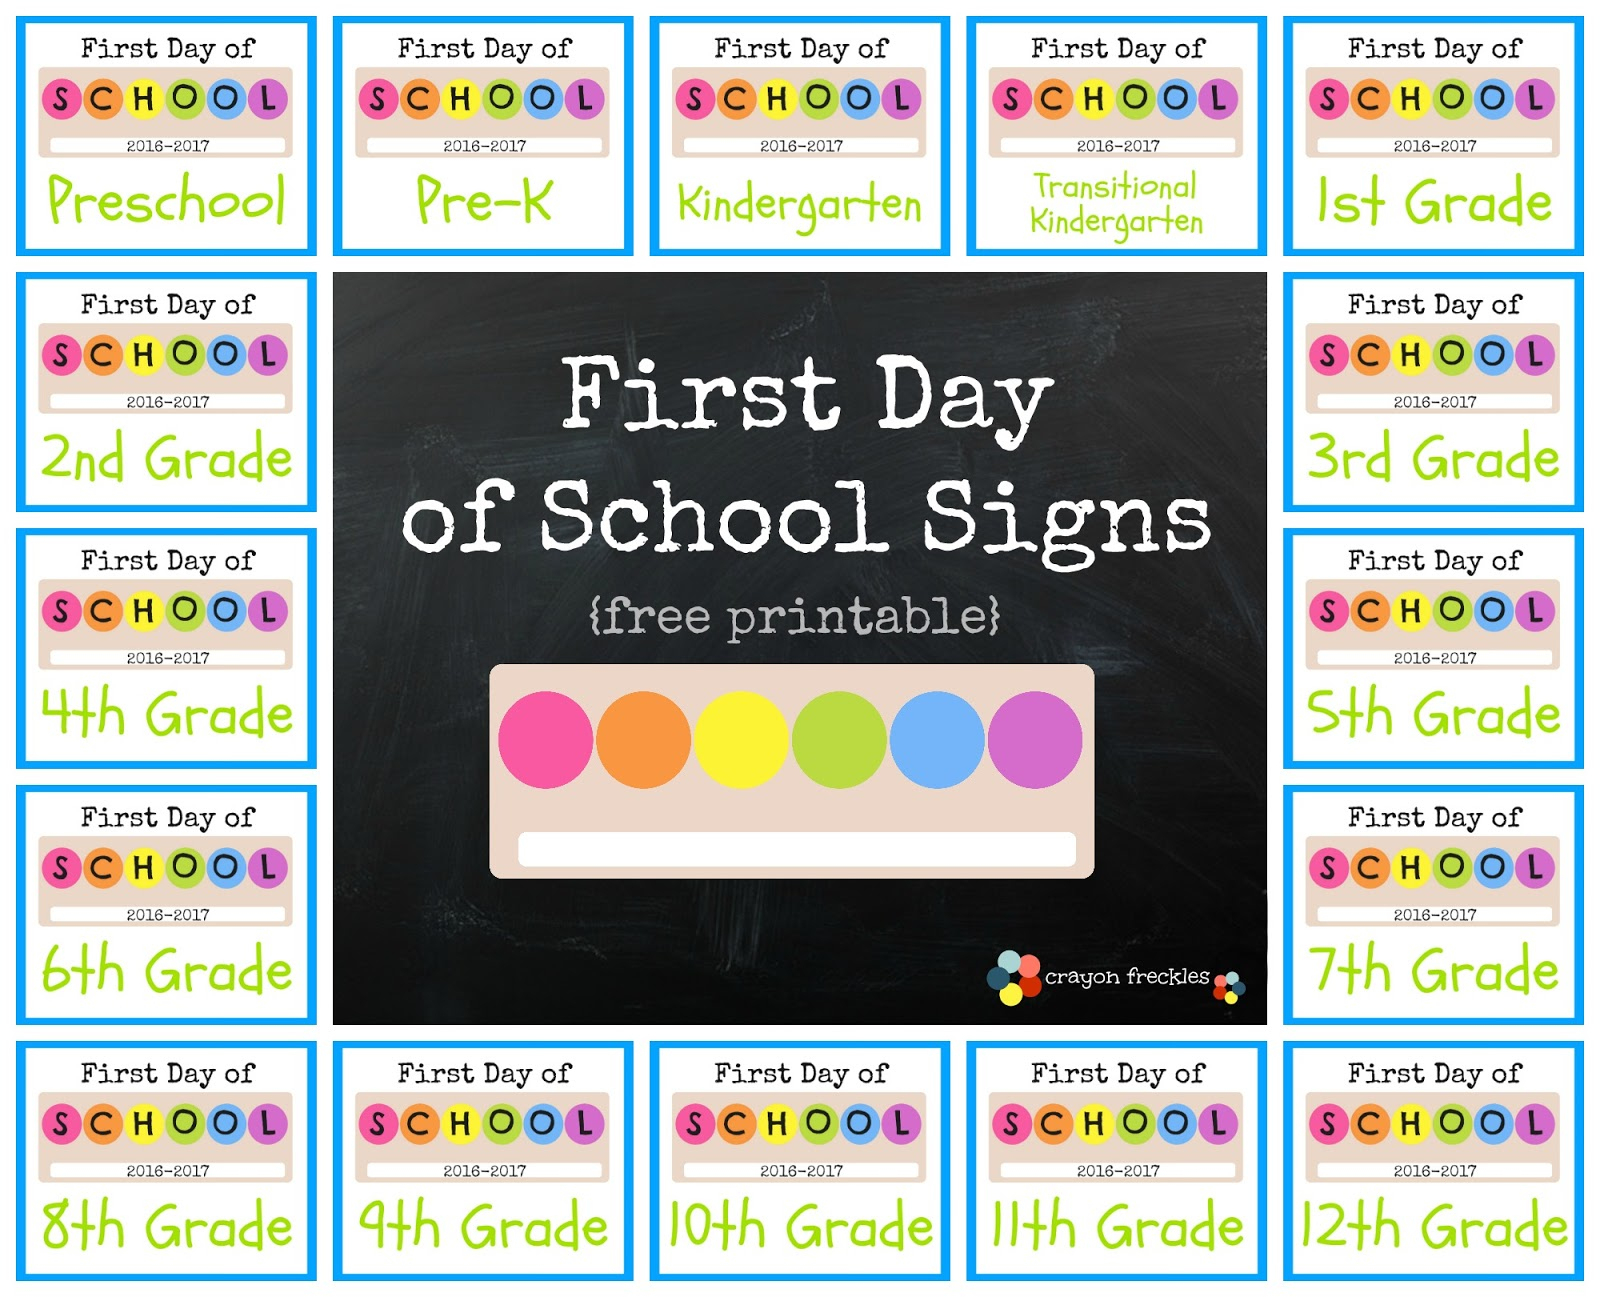 Crayon Freckles: First Day Of School Signs {Free Printable} - Free Printable First Day Of School Signs